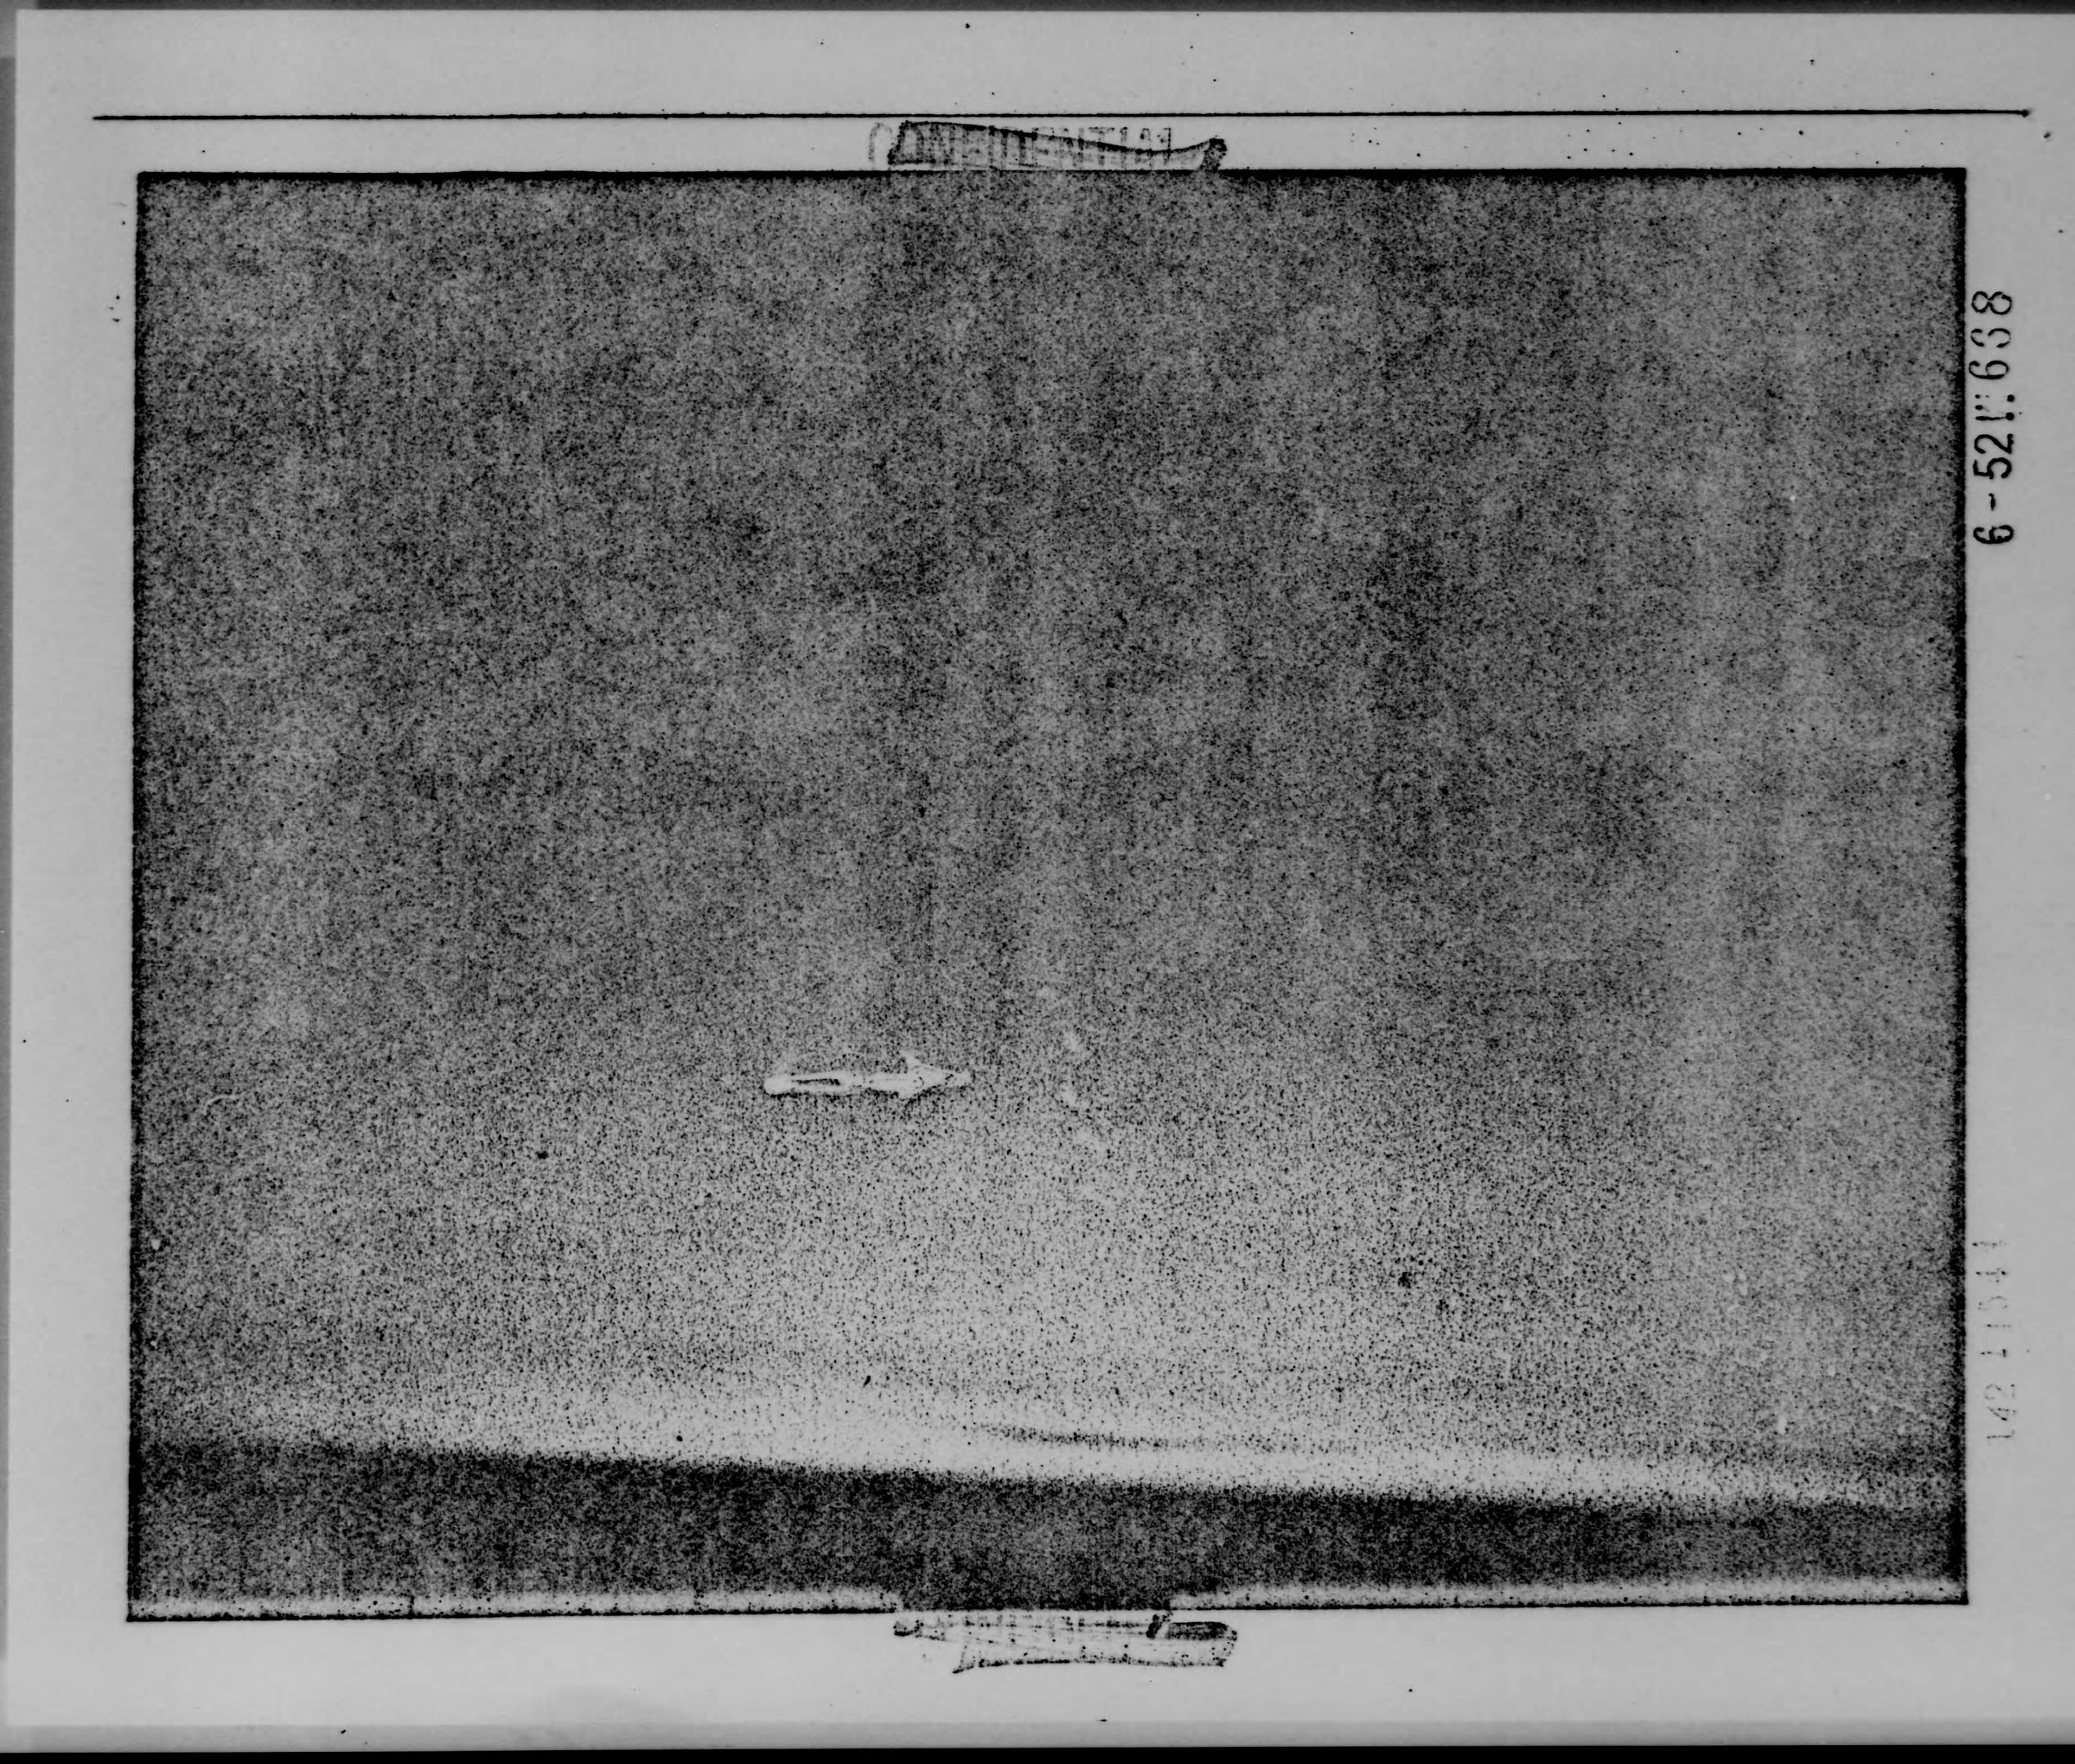 A terrible copy of the photograph contained in the National Archives. In the center, you can see a hand-drawn arrow pointing towards the 7 unidentified objects observed from the RB-36 crew. (National Archives)